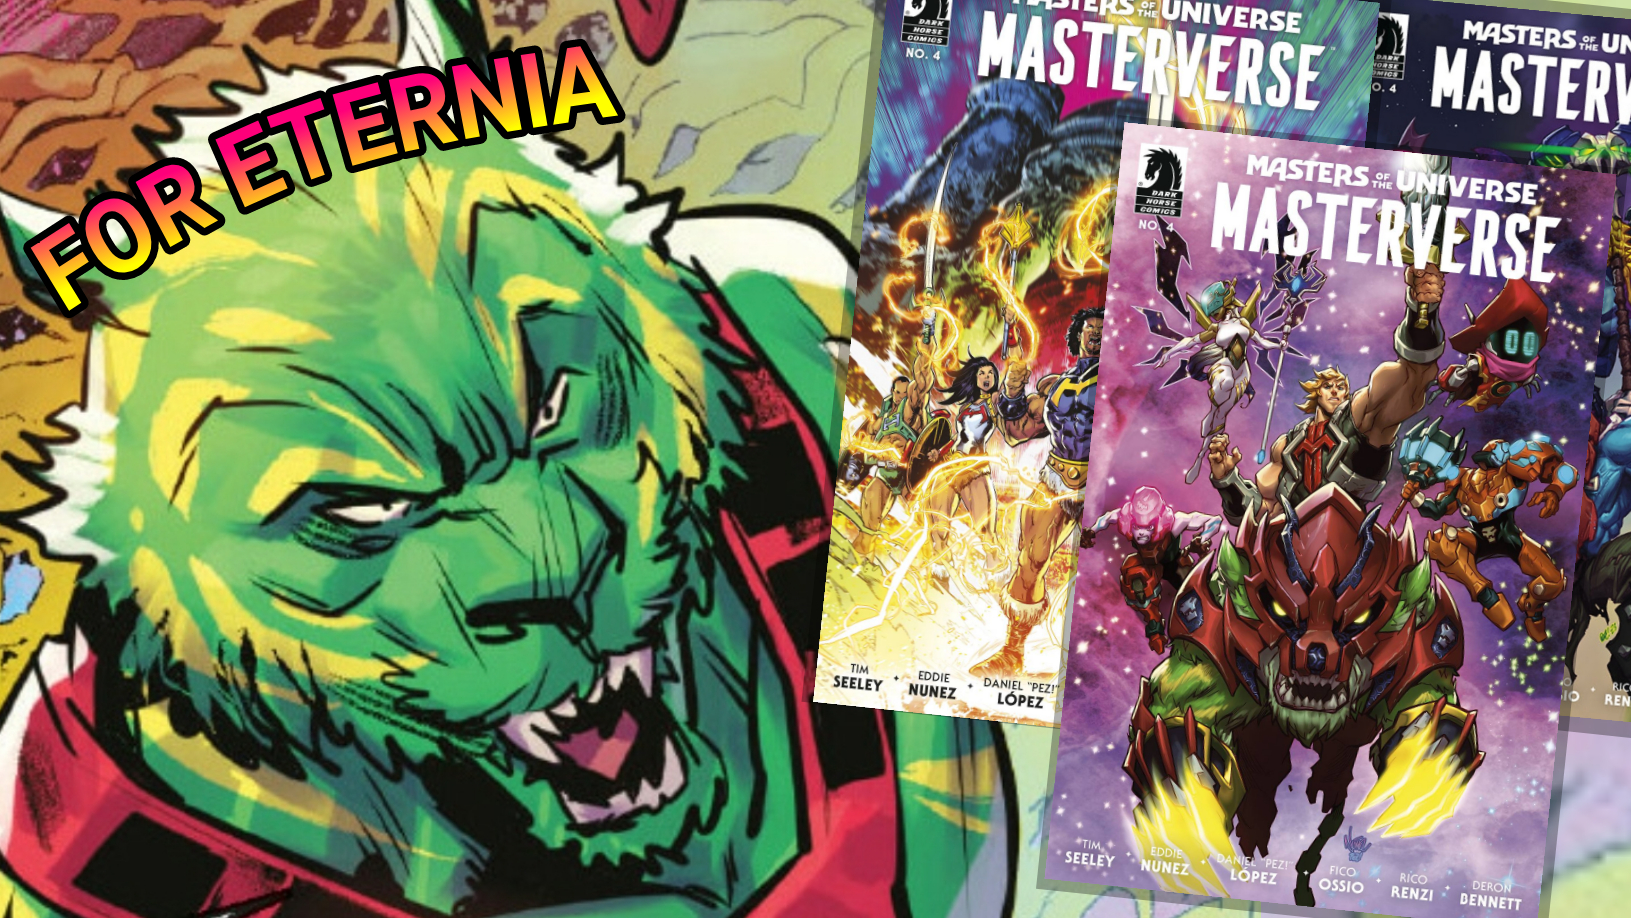 Dark Horse Comics MASTERVERSE issue #4 is out today